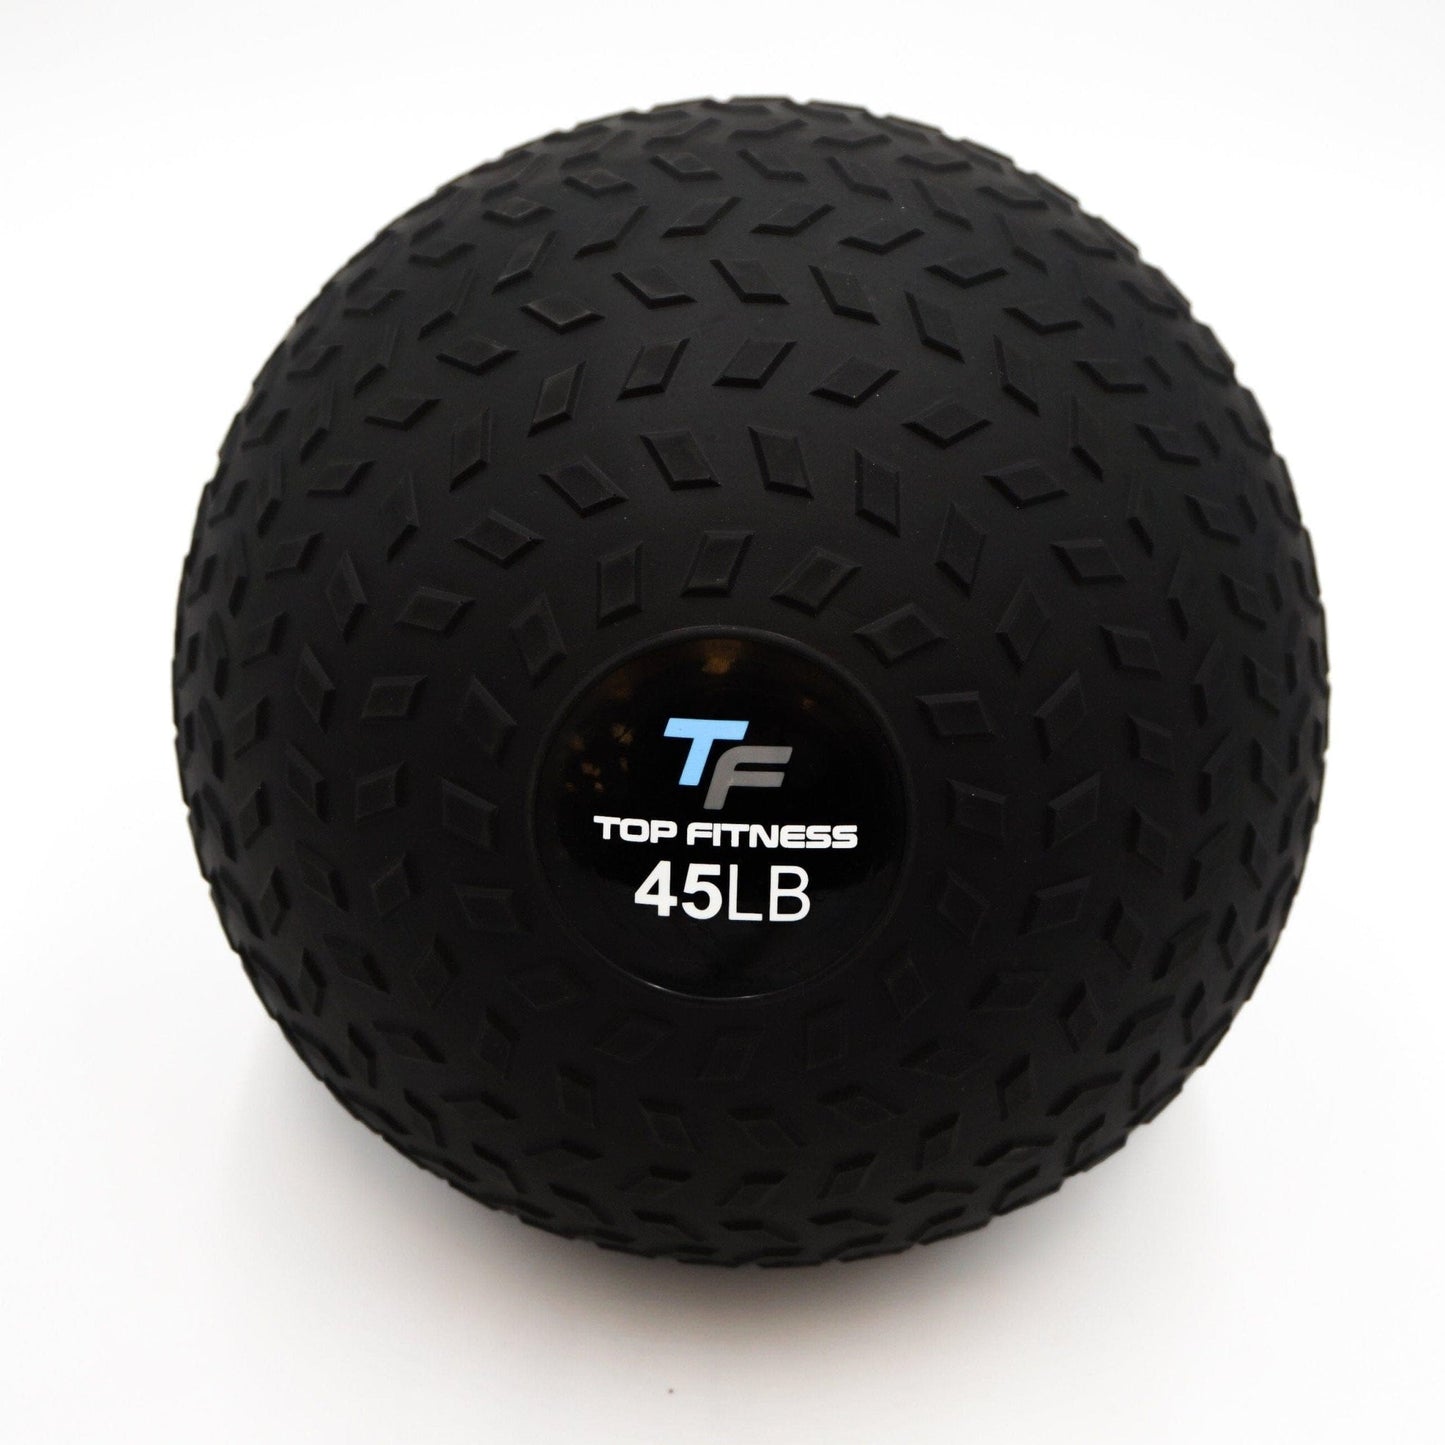 Top Fitness Slam Ball Weighted Resistance Top Fitness 45lb